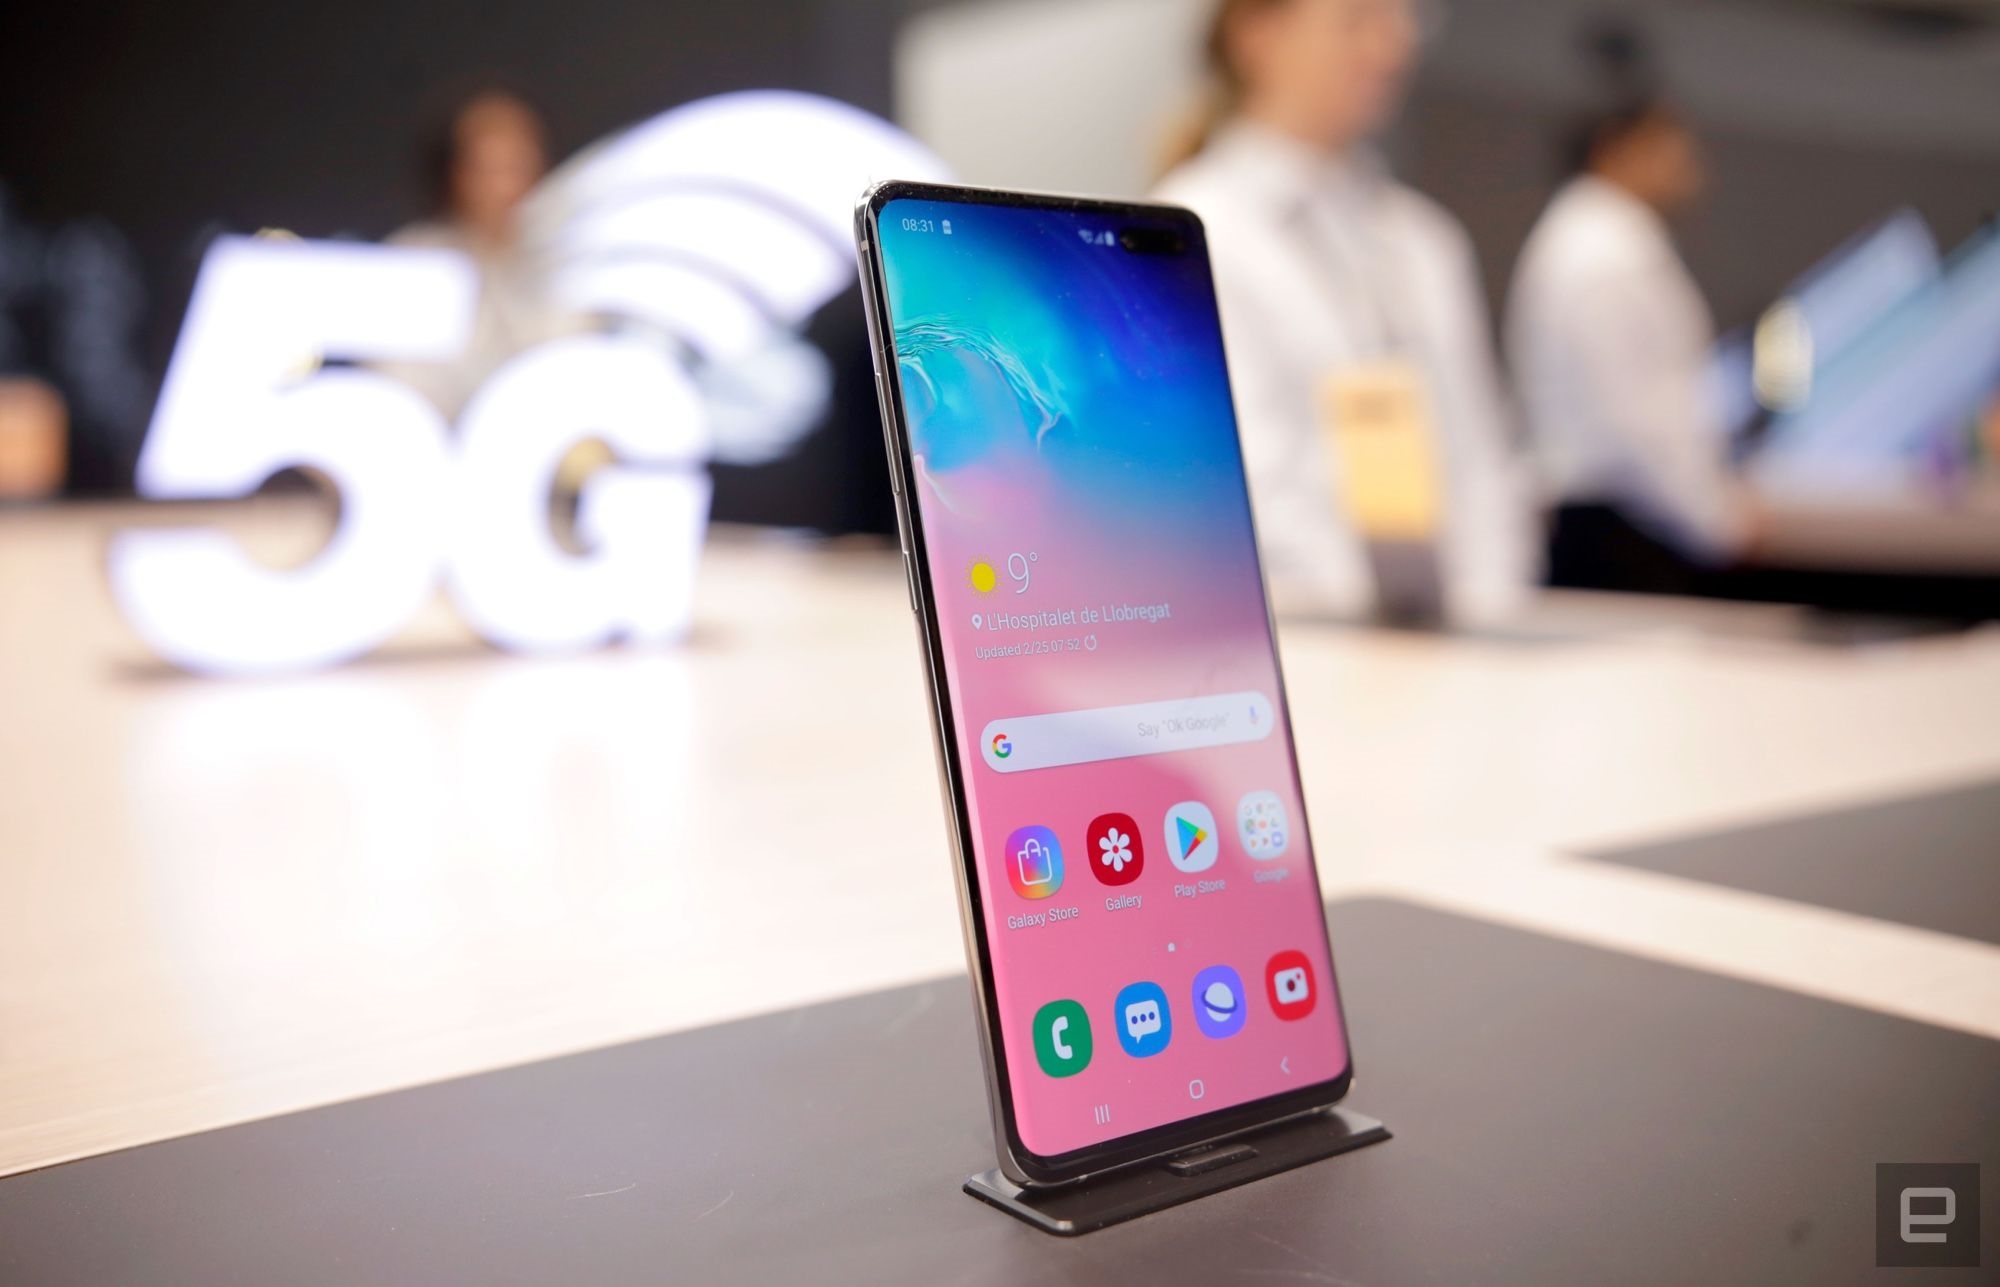 Making sense of the 5G phones at Mobile World Congress 2019 | DeviceDaily.com